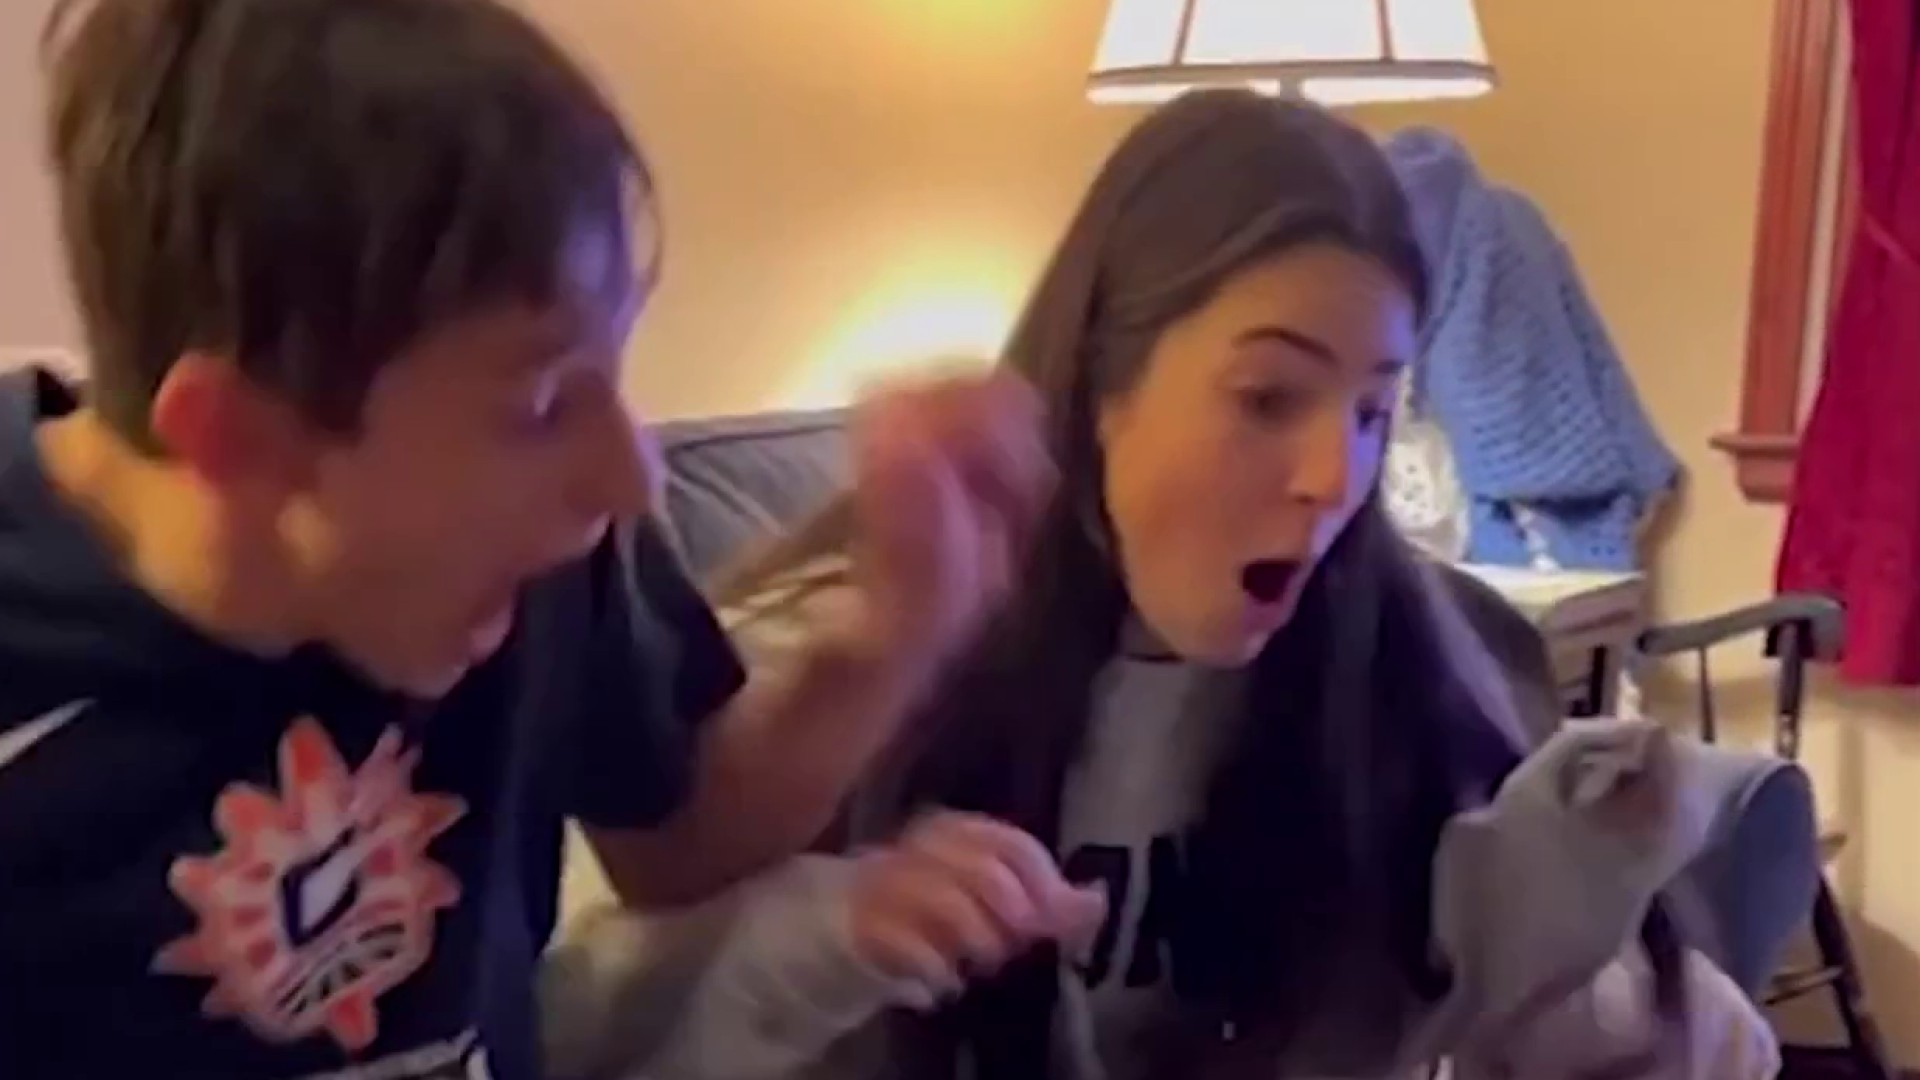 Sister Rep Bro Sex Porn Mobi Com - Video of Woodstock Academy Siblings Reacting to Harvard Acceptance Goes  Viral â€“ NBC Connecticut